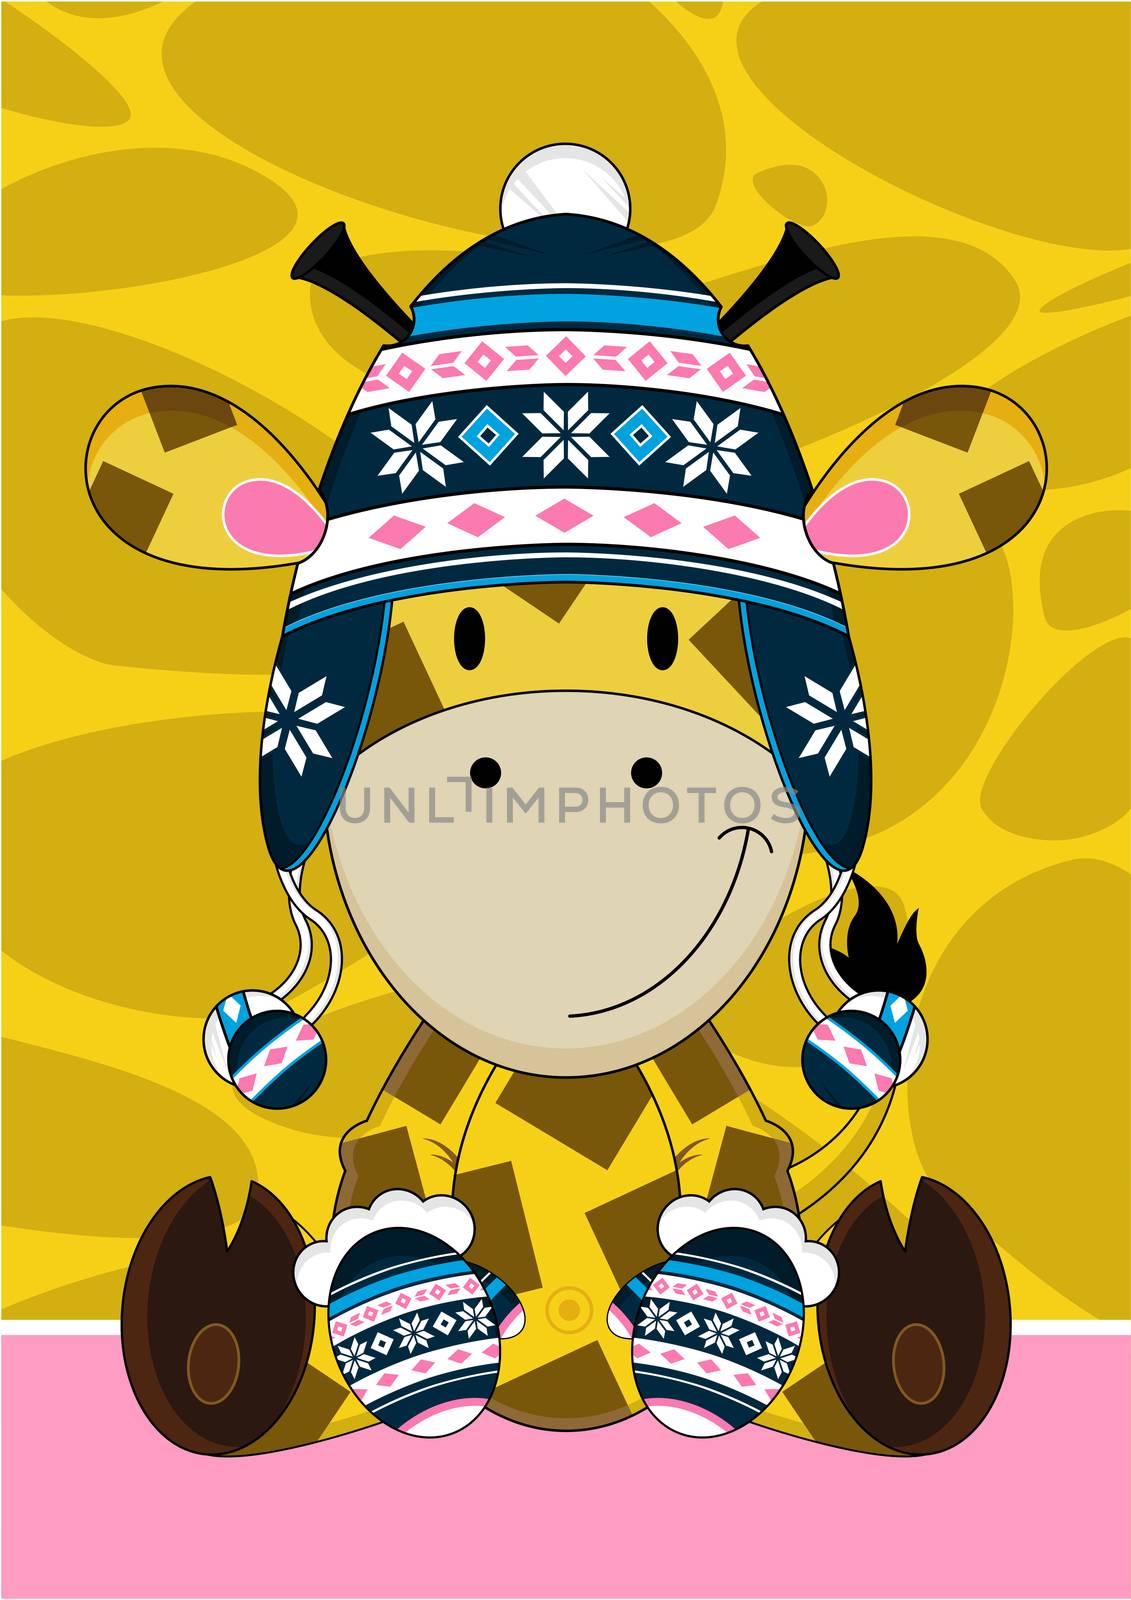 Cute Cartoon Giraffe in Wooly Hat and Mittens Illustration - By Mark Murphy Creative